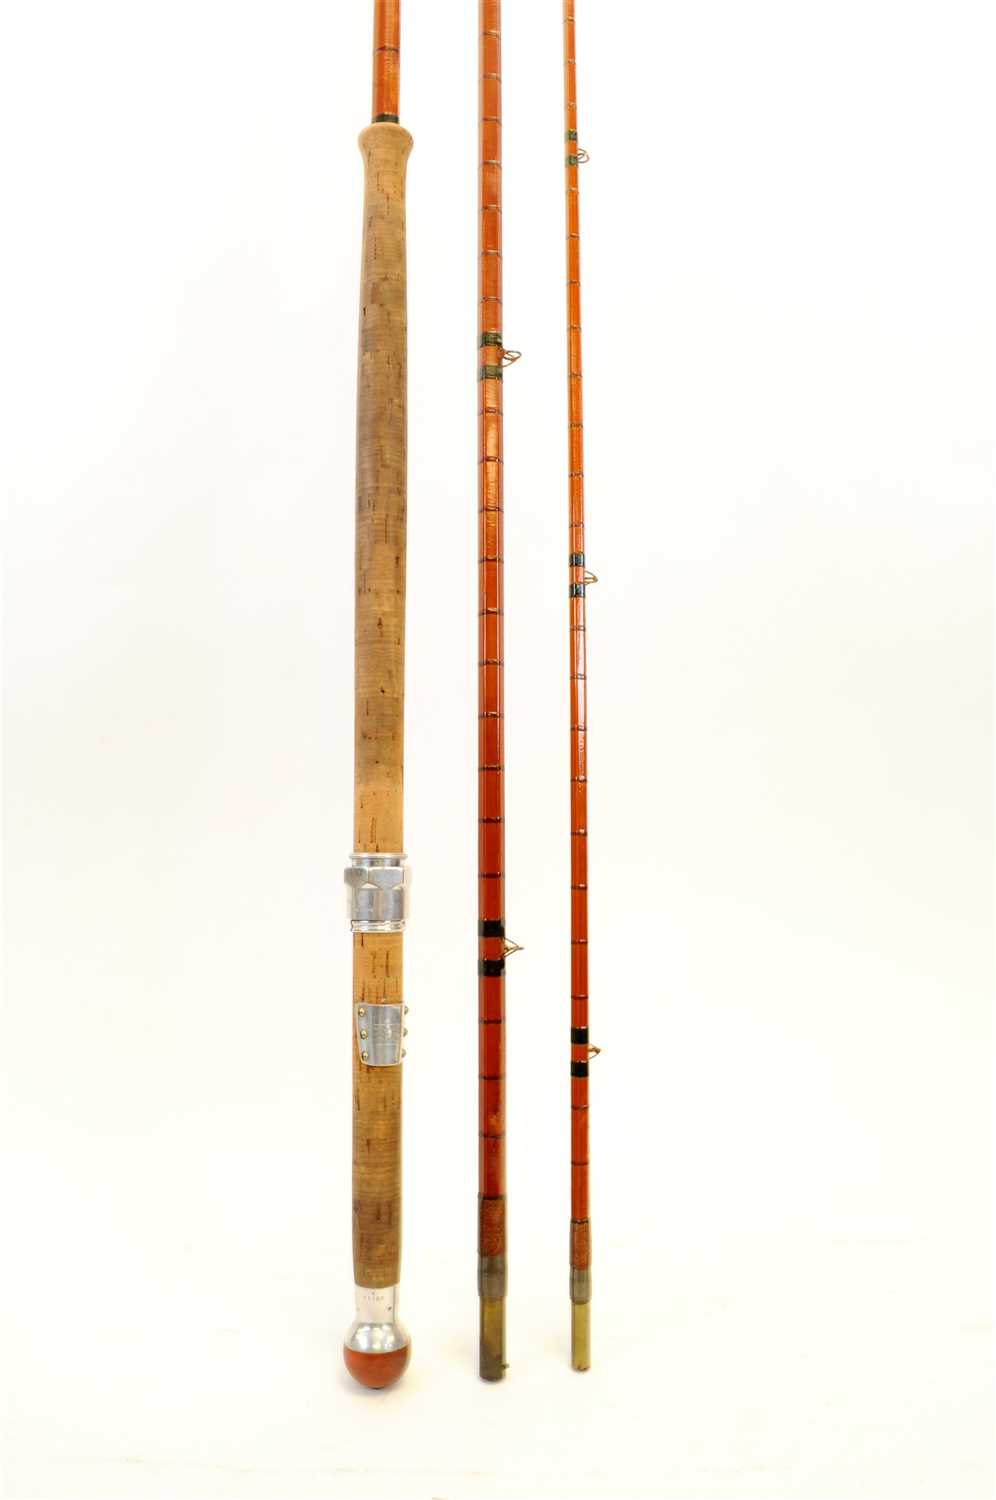 An early 20th century three-sectional split-cane Hardy fishing rod